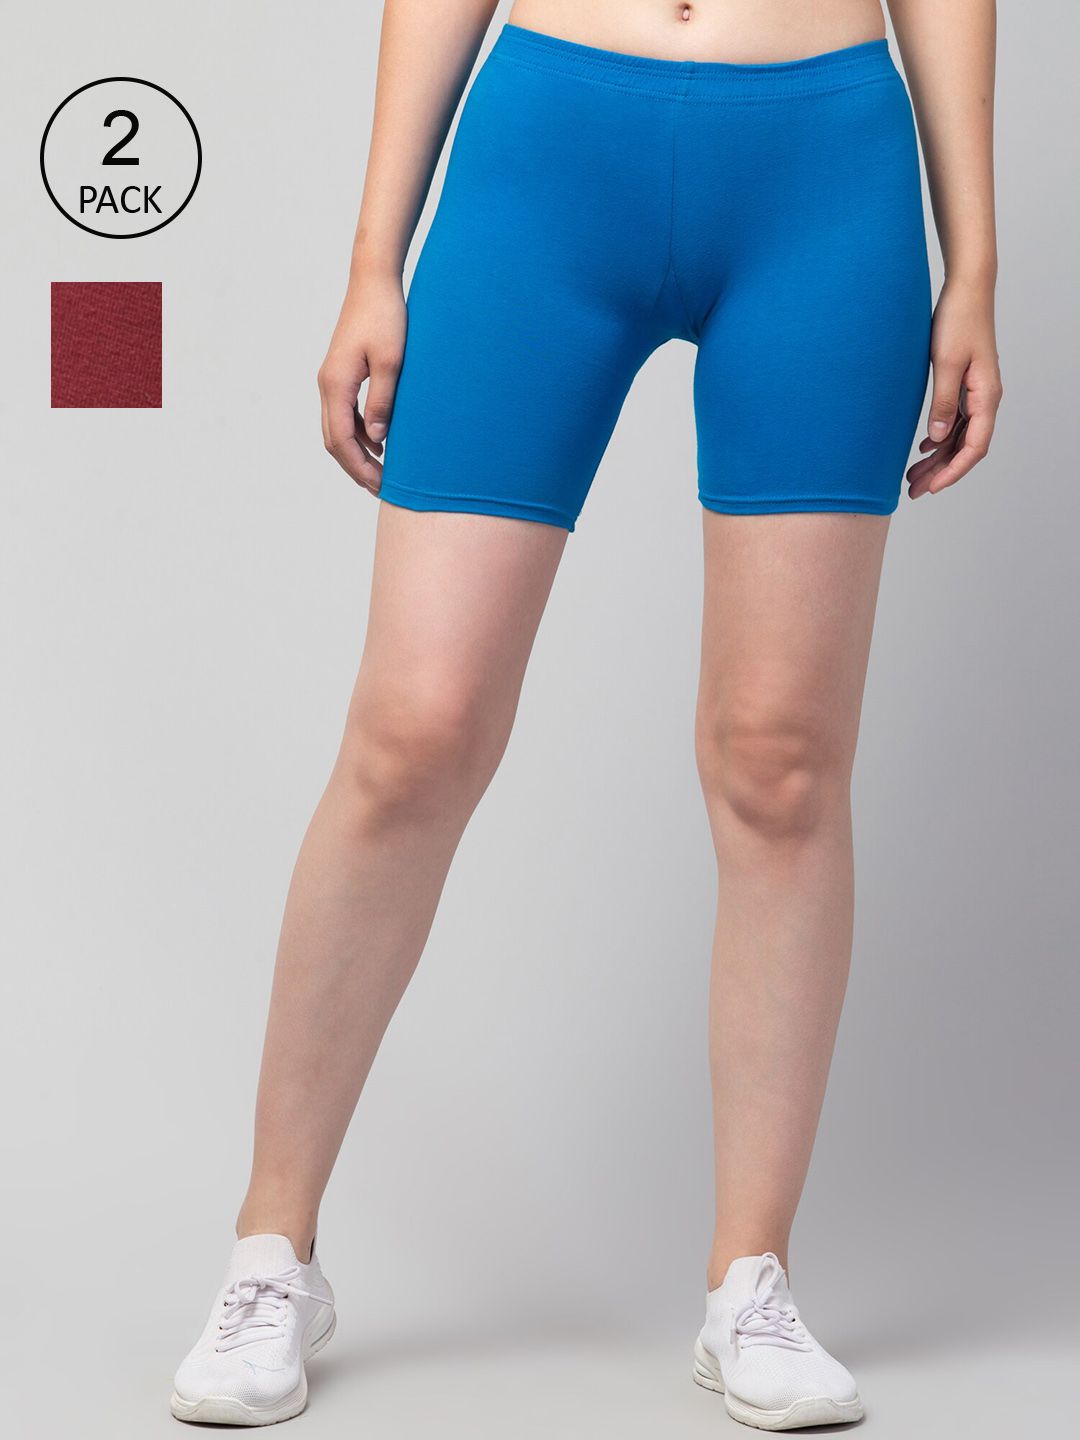 Apraa & Parma Women Maroon & Blue Set of 2 Slim Fit Cotton Cycling Sports Shorts Price in India